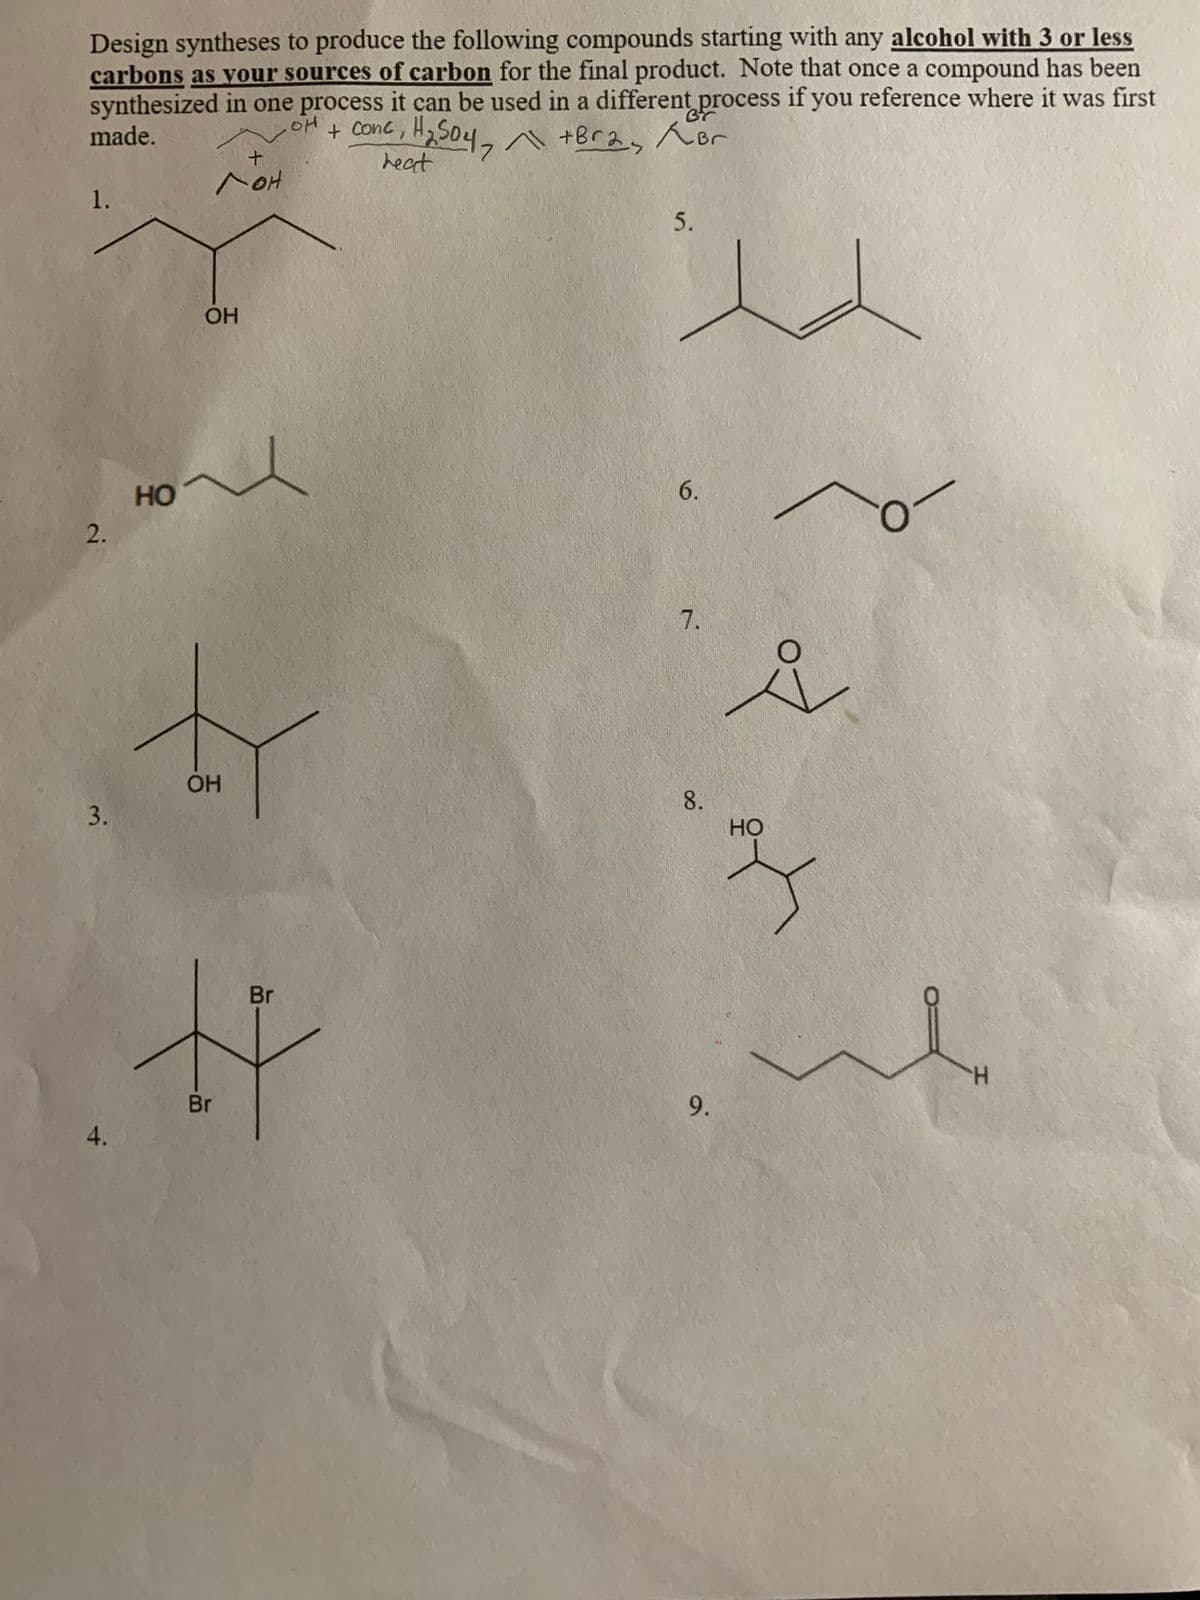 Design syntheses to produce the following compounds starting with any alcohol with 3 or less
carbons as vour sources of carbon for the final product. Note that once a compound has been
synthesized in one process it can be used in a different process if you reference where it was first
made.
504, +Bra Kor
heat
+ Conc,
1.
5.
OH
HO
6.
7.
OH
8.
Но
Br
Br
9.
4.
2.
3.
